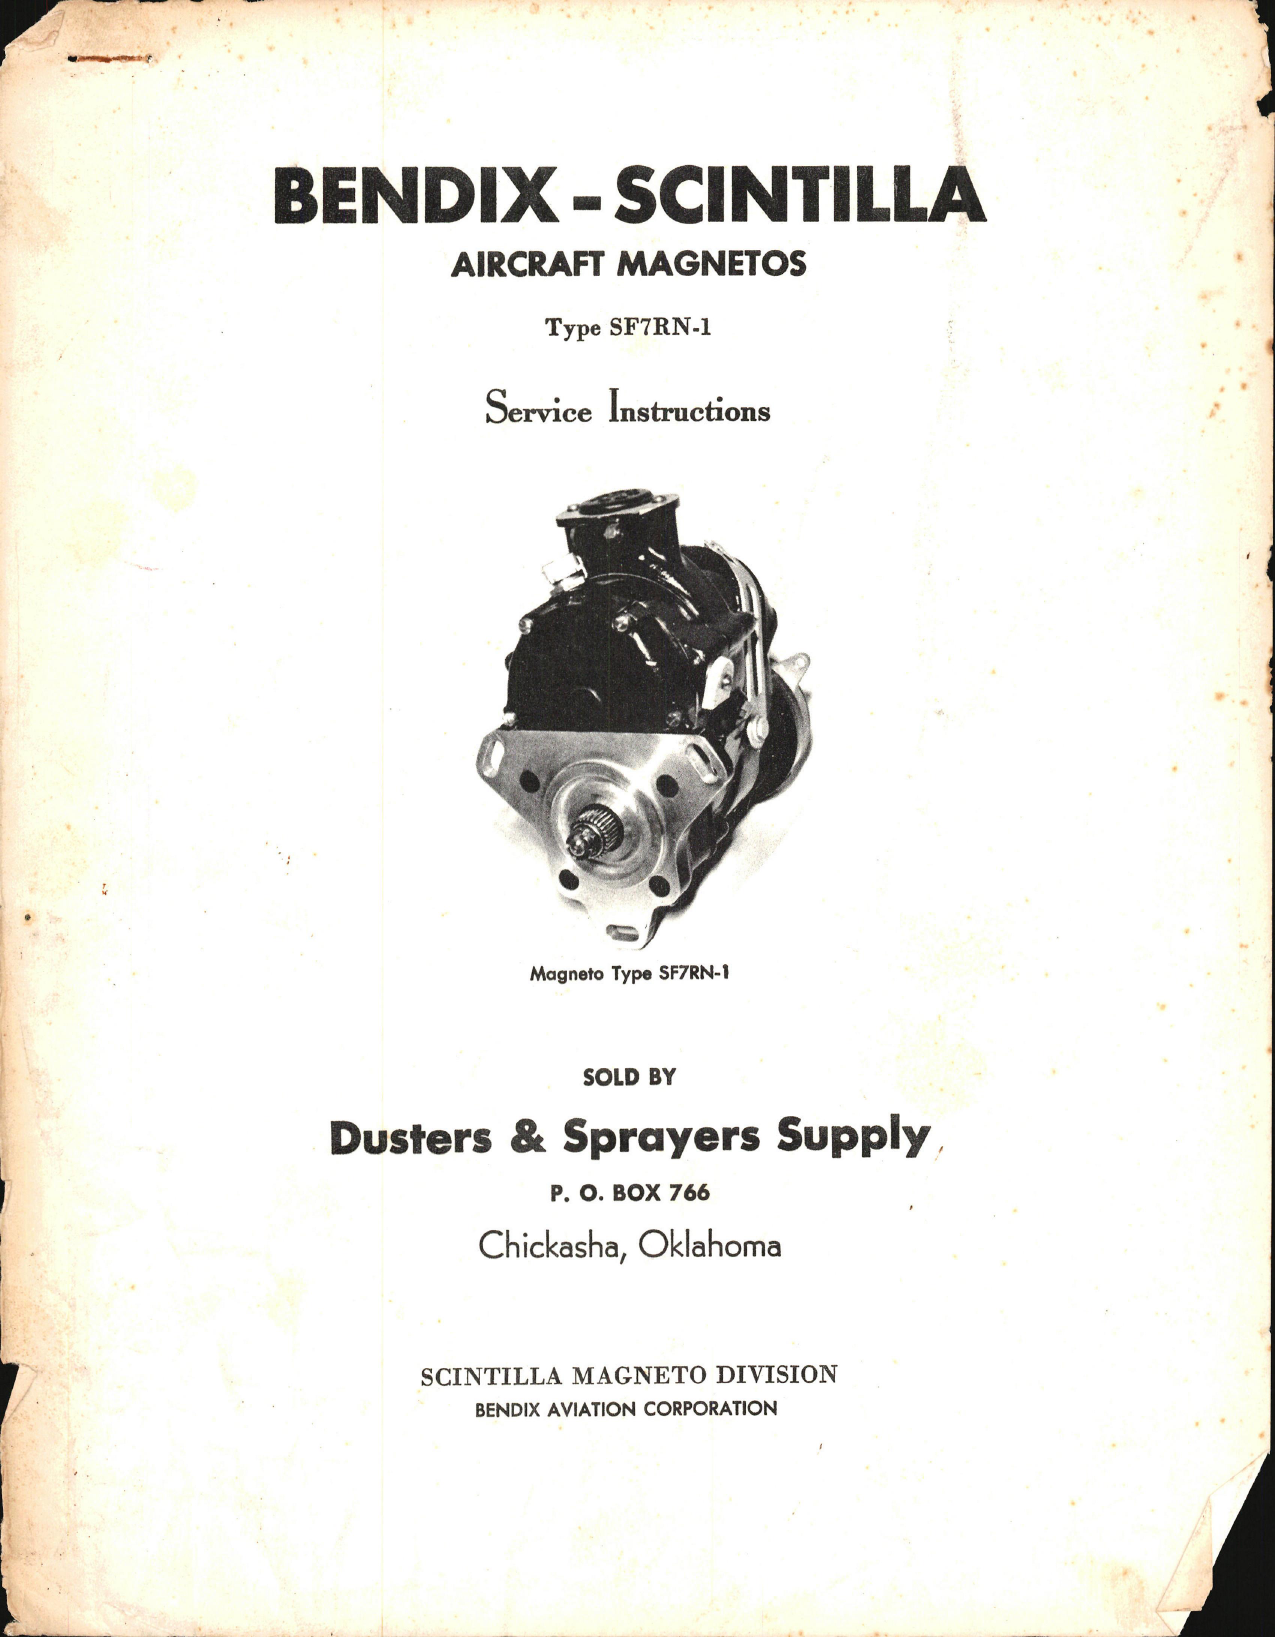 Sample page 1 from AirCorps Library document: Service Instructions for Bendix-Scintilla Magnetos Type SF7RN-1